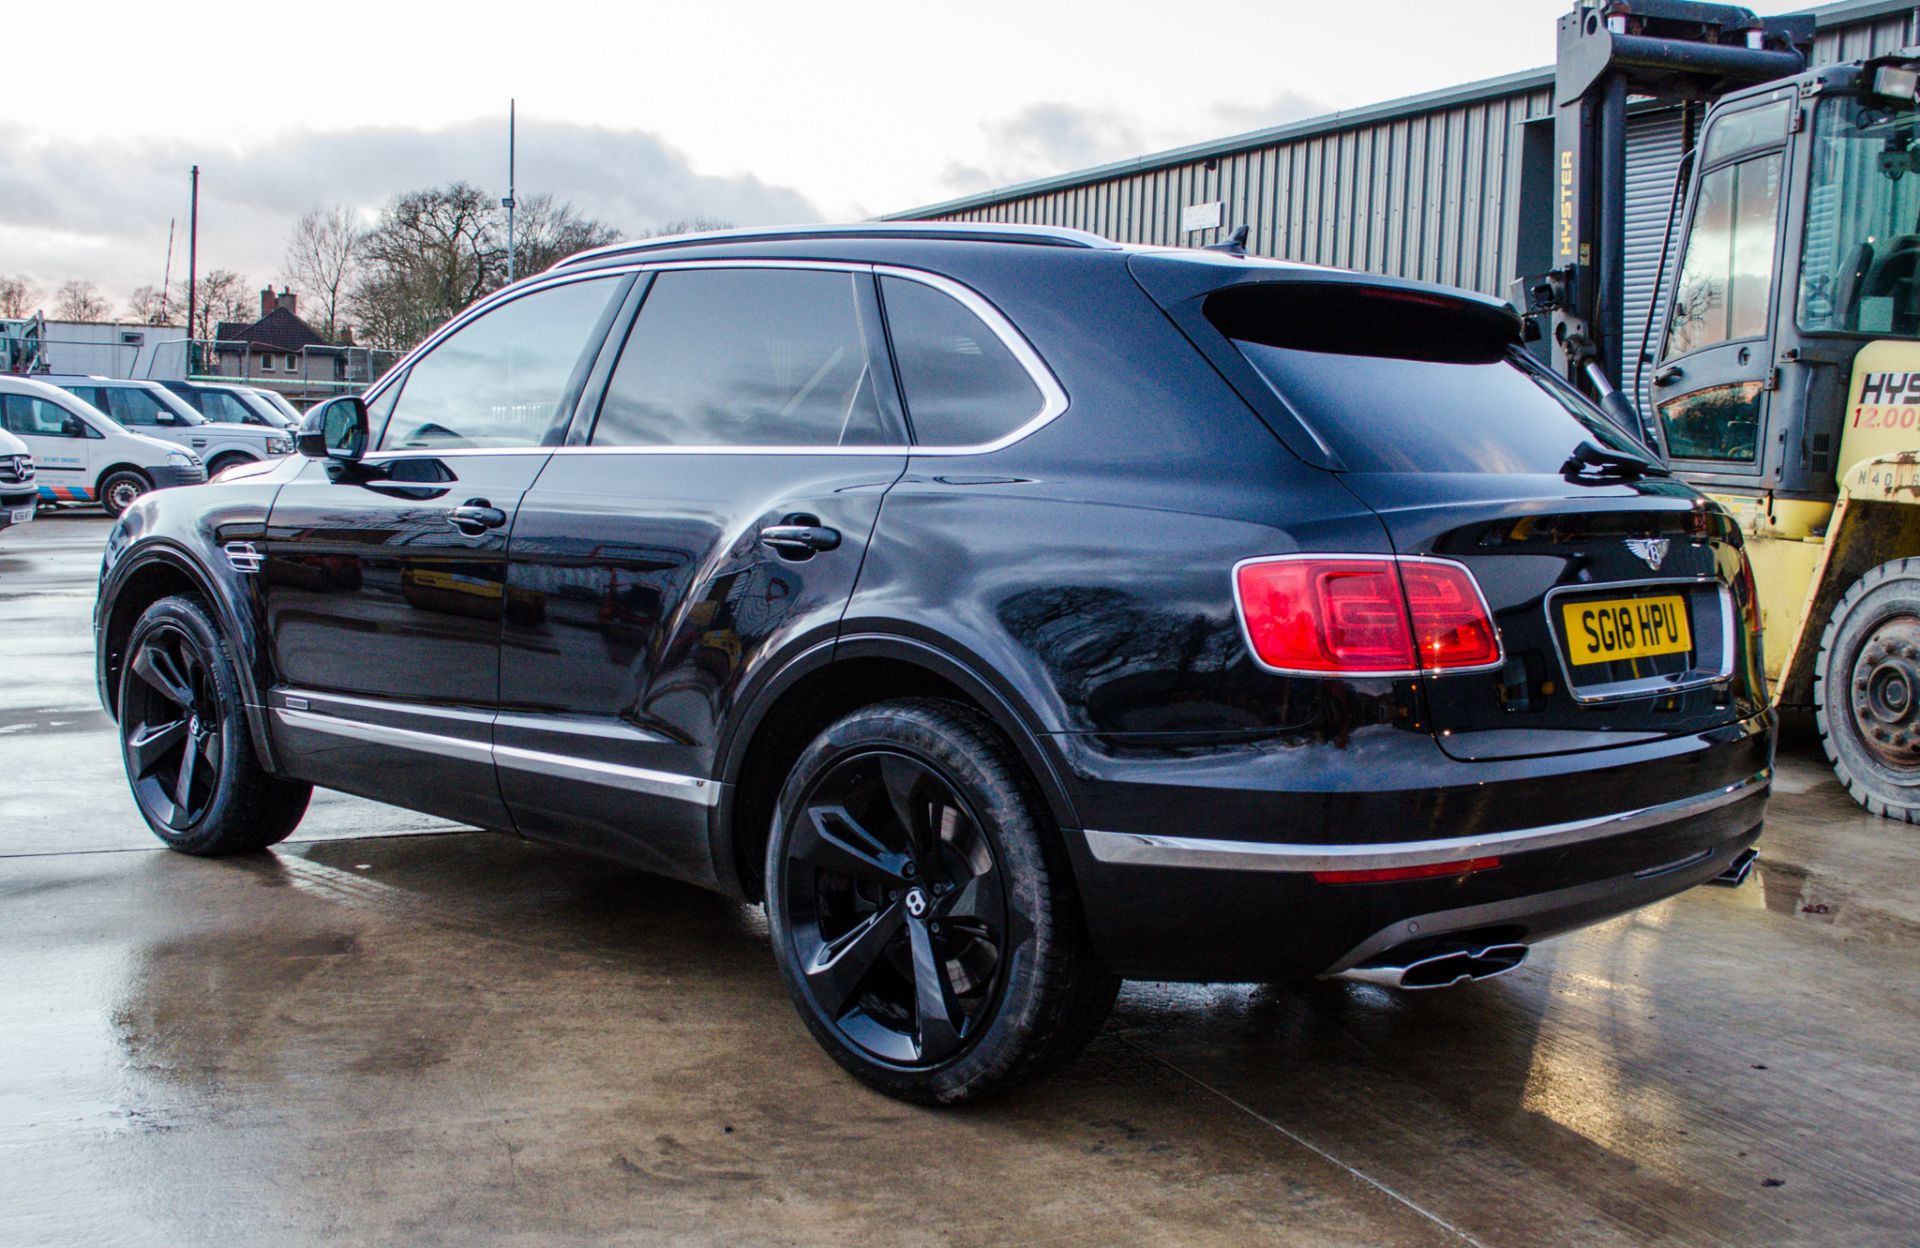 Bentley Bentayga 4.0 V8 diesel 4wd 7 seat SUV Reg No: SG 18 HPU Recorded Mileage: 37,650 Date of - Image 4 of 41